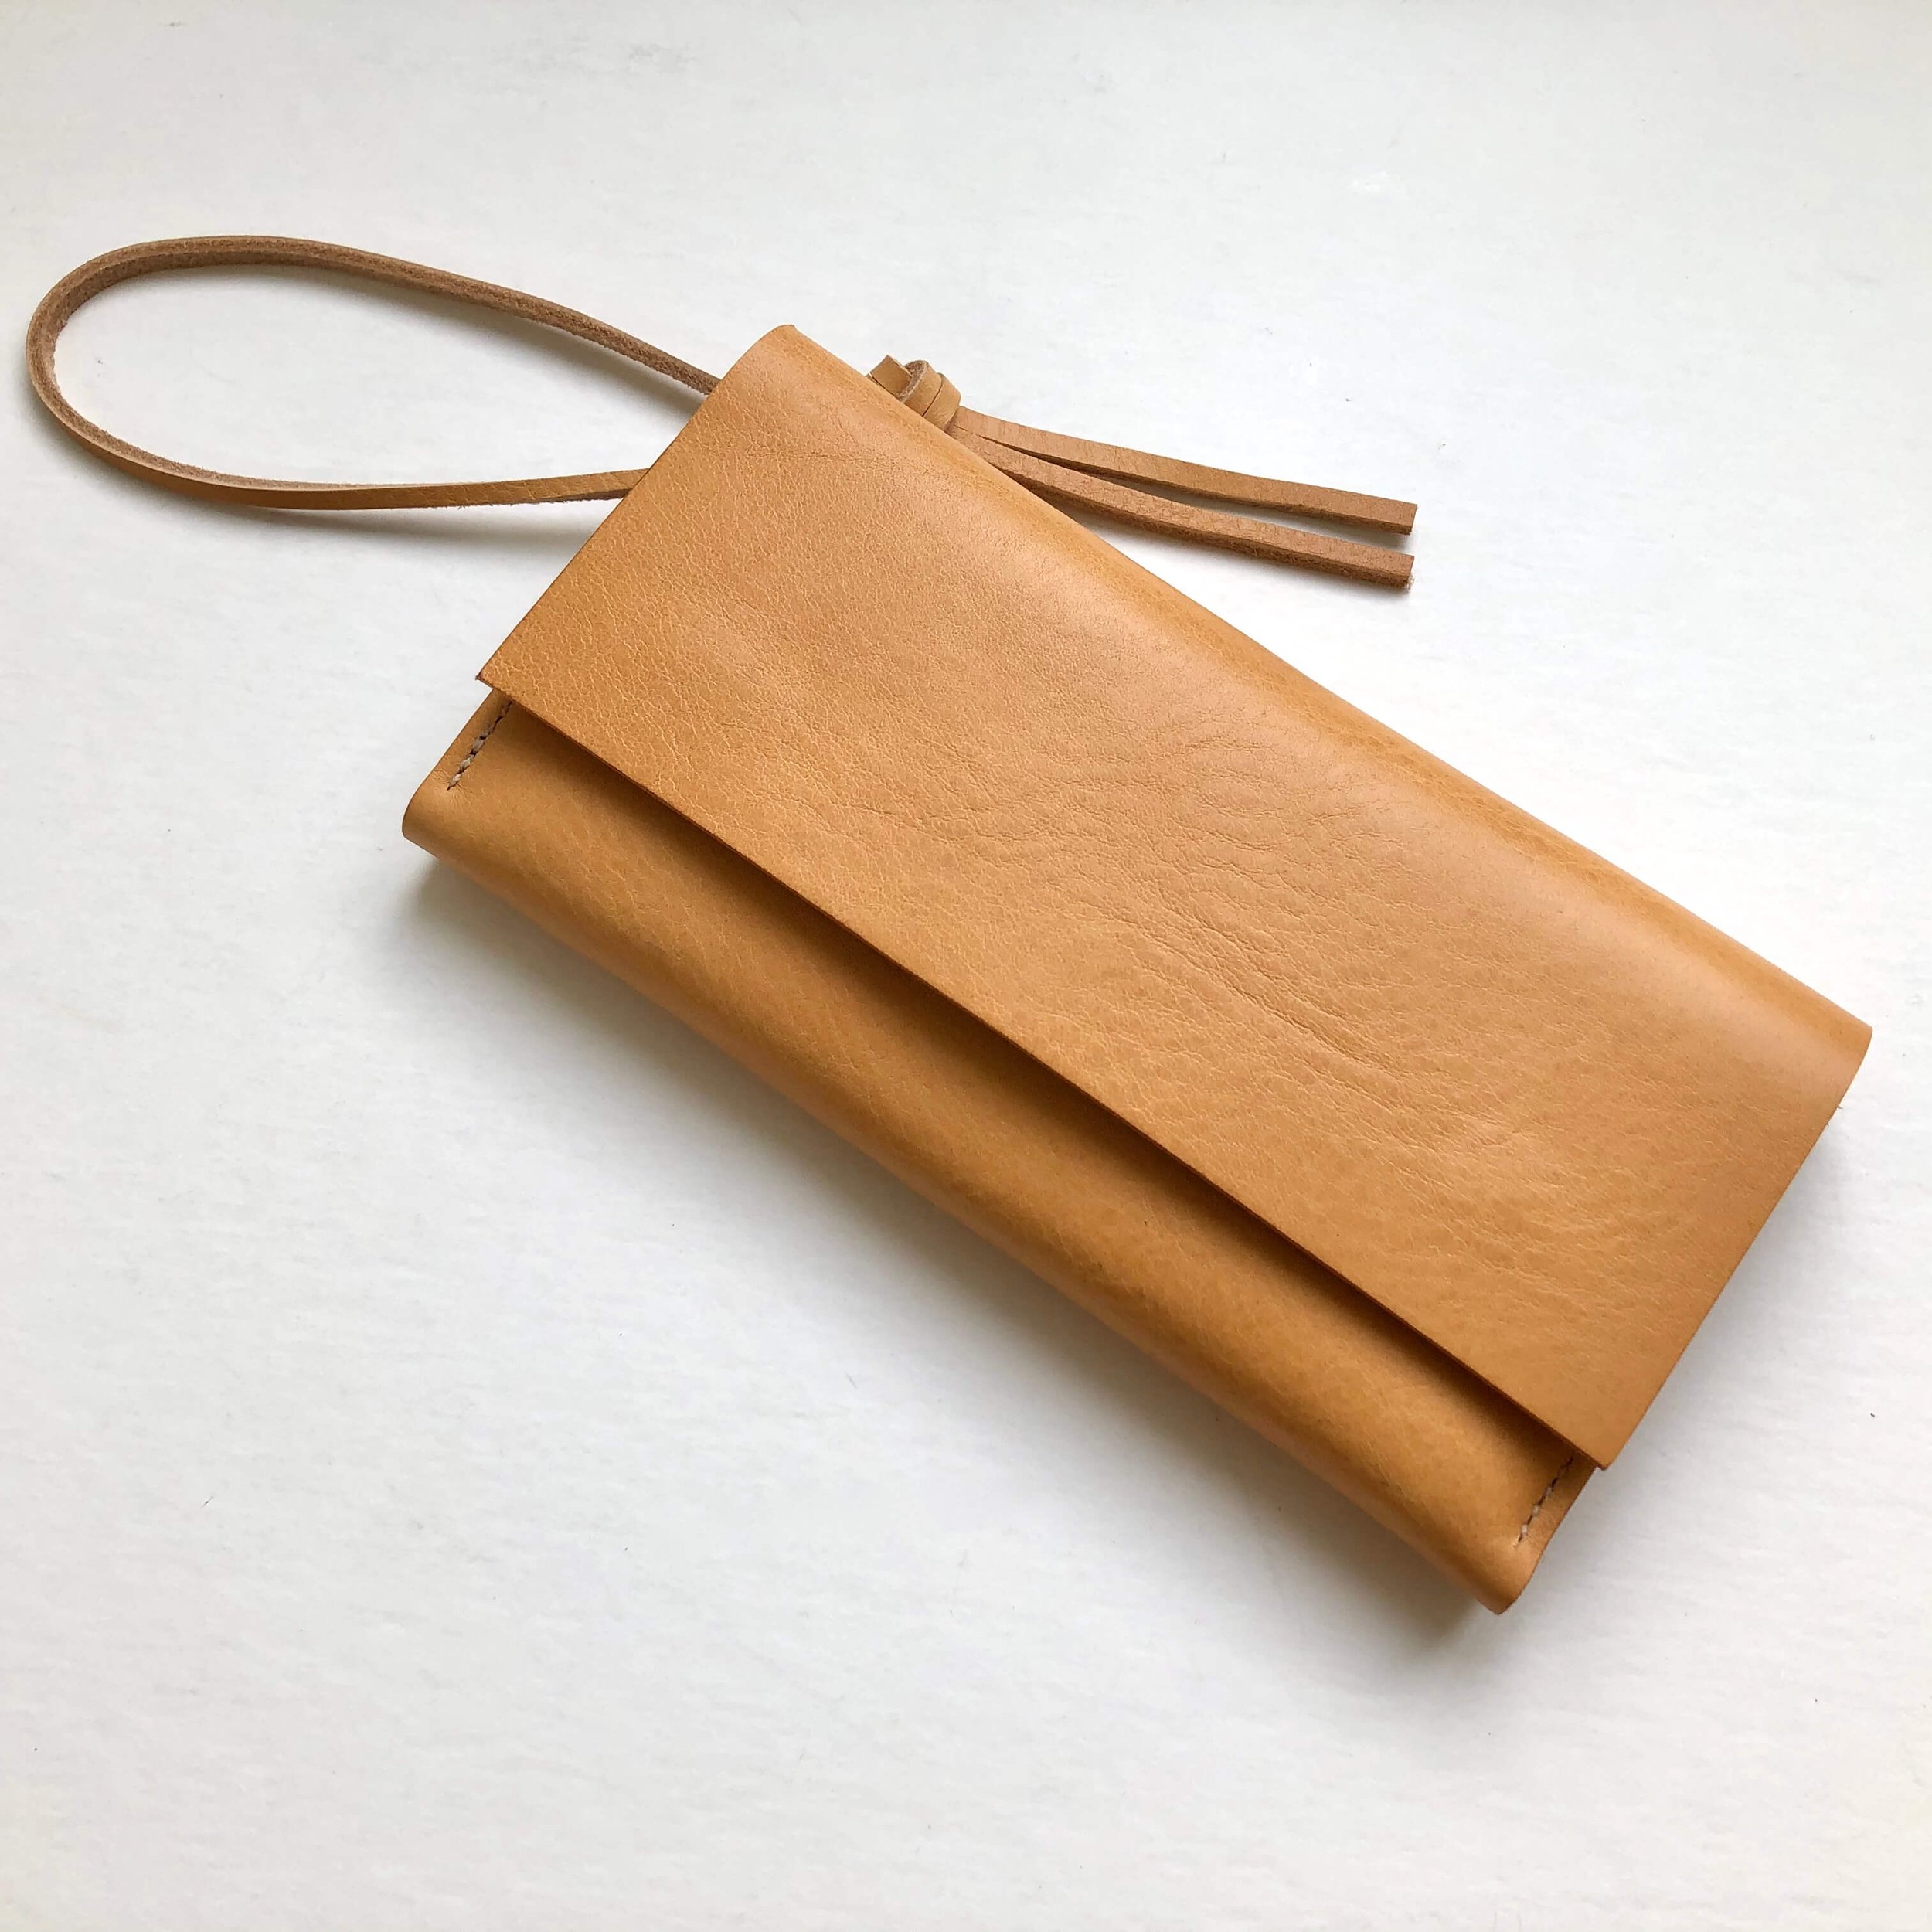 CARV sustainable leather purse handmade in the UK.